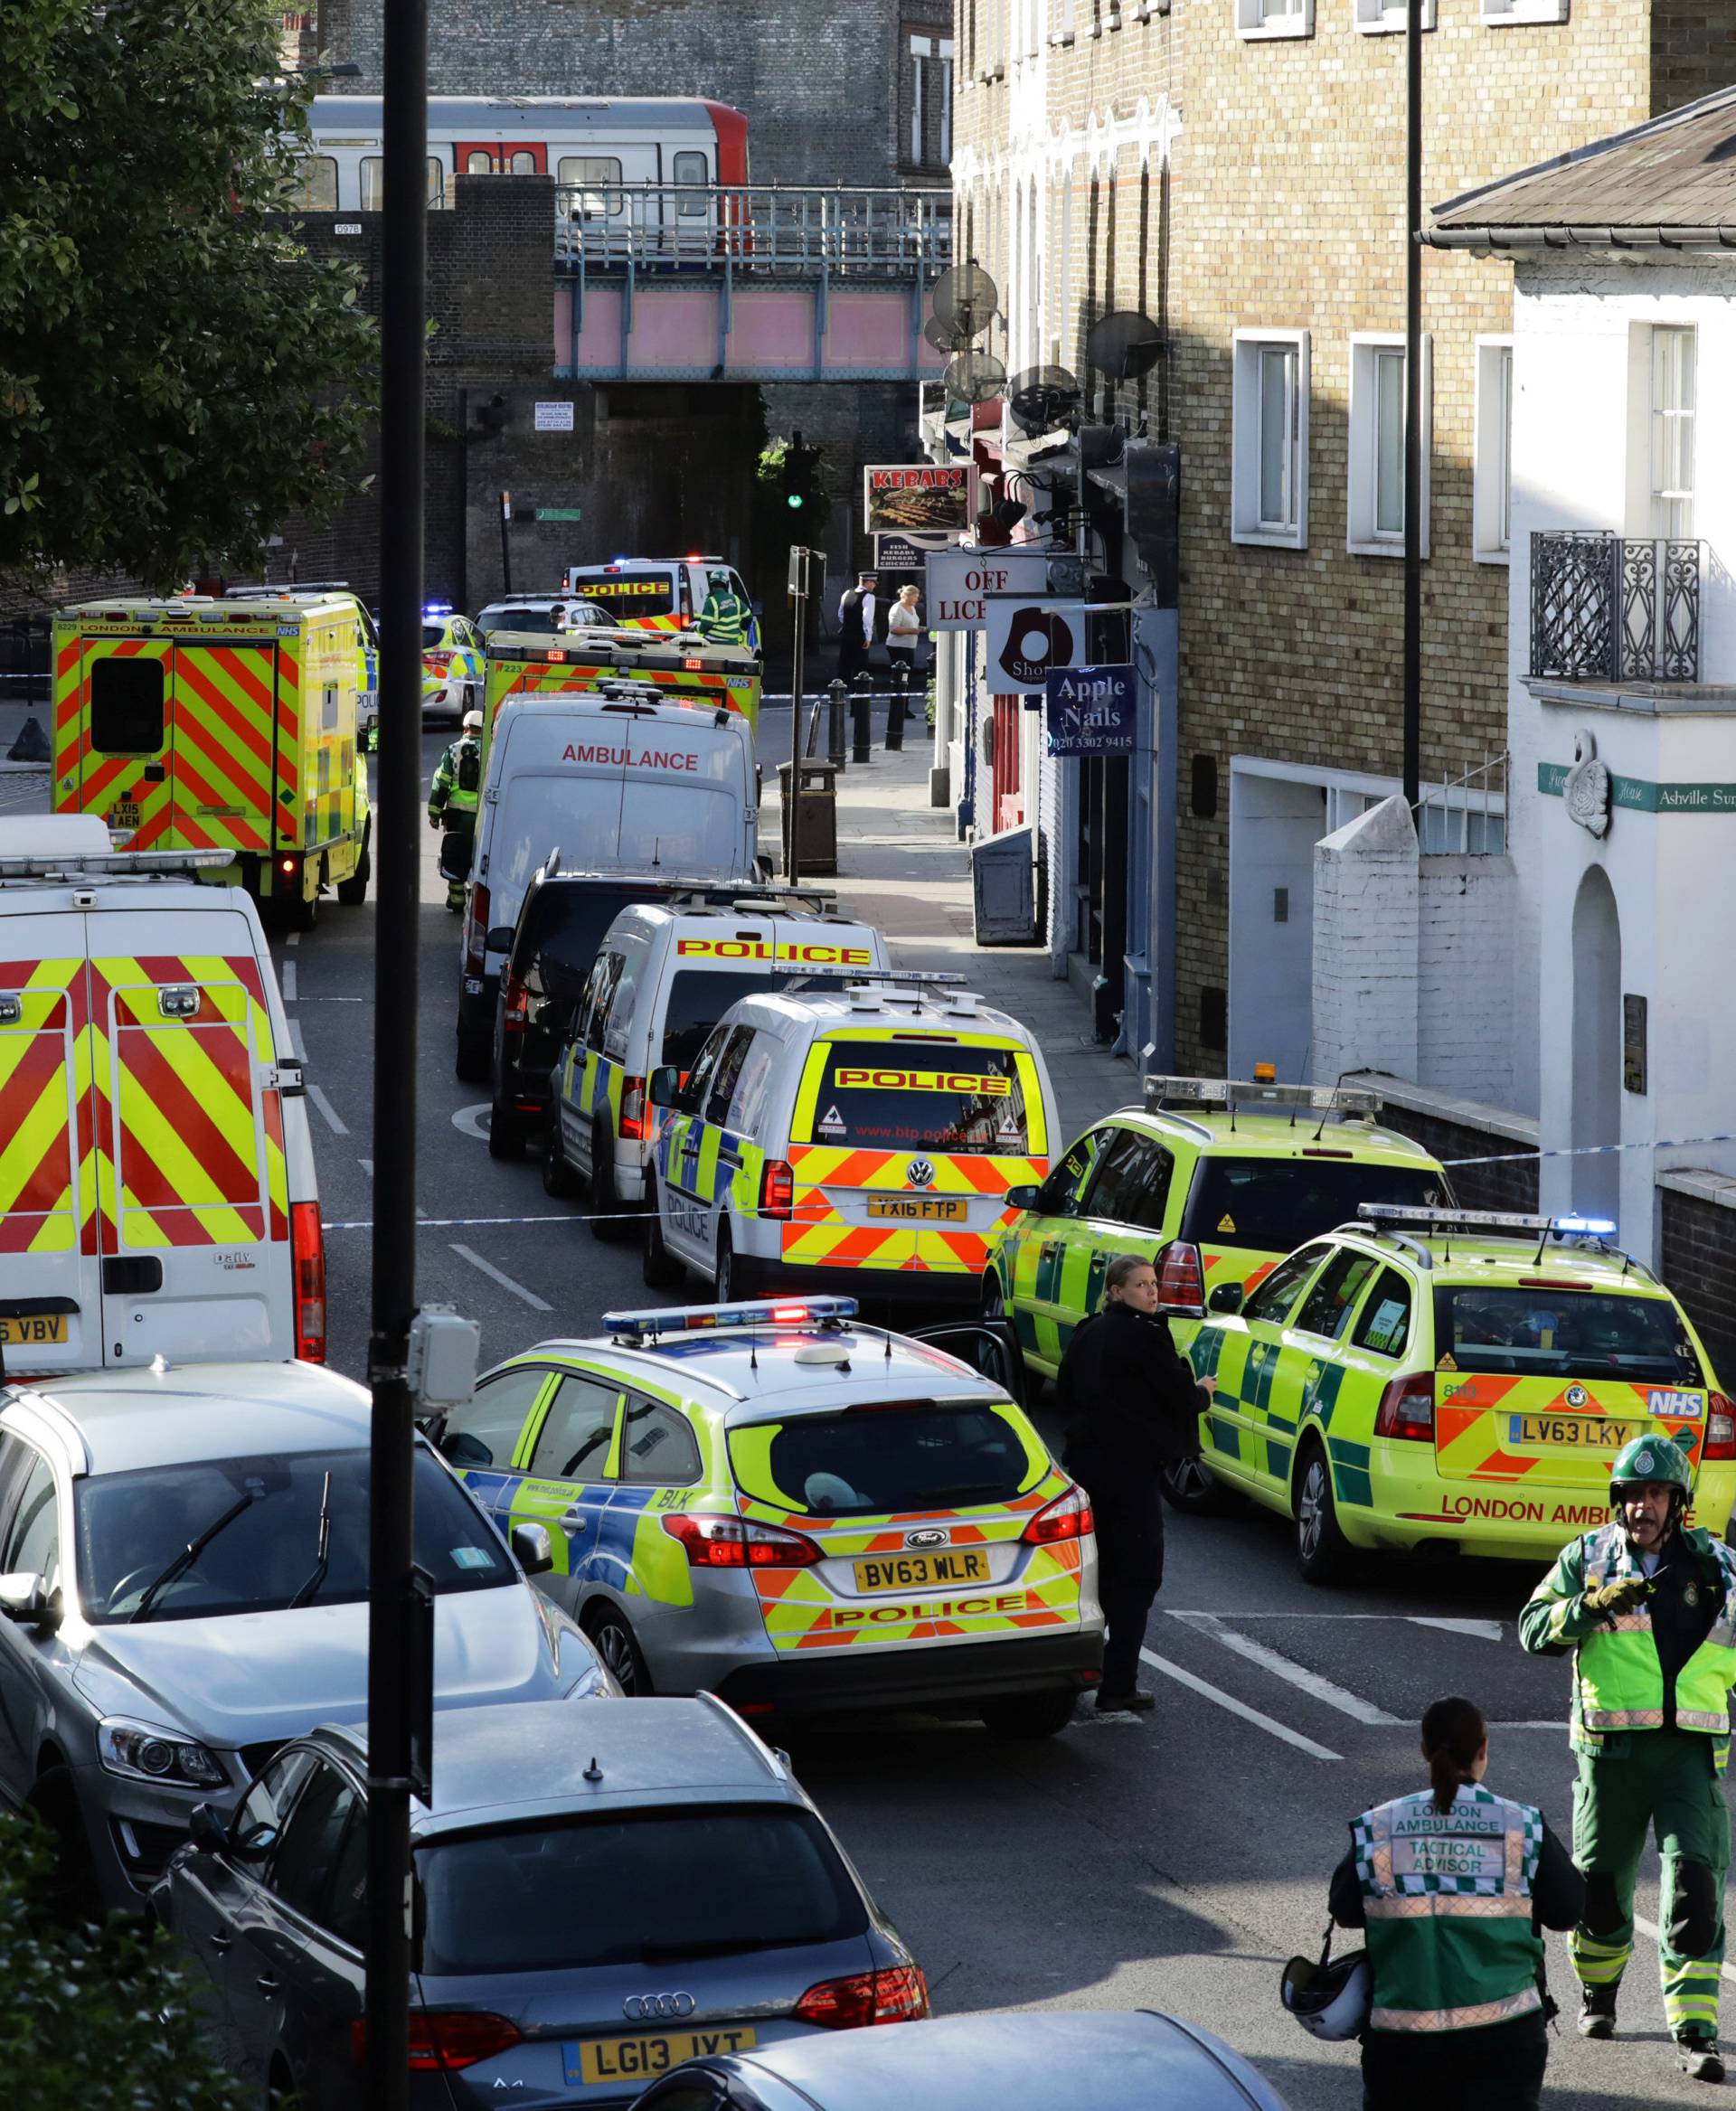 Police vehicles line the street near Parsons Green tube station in London